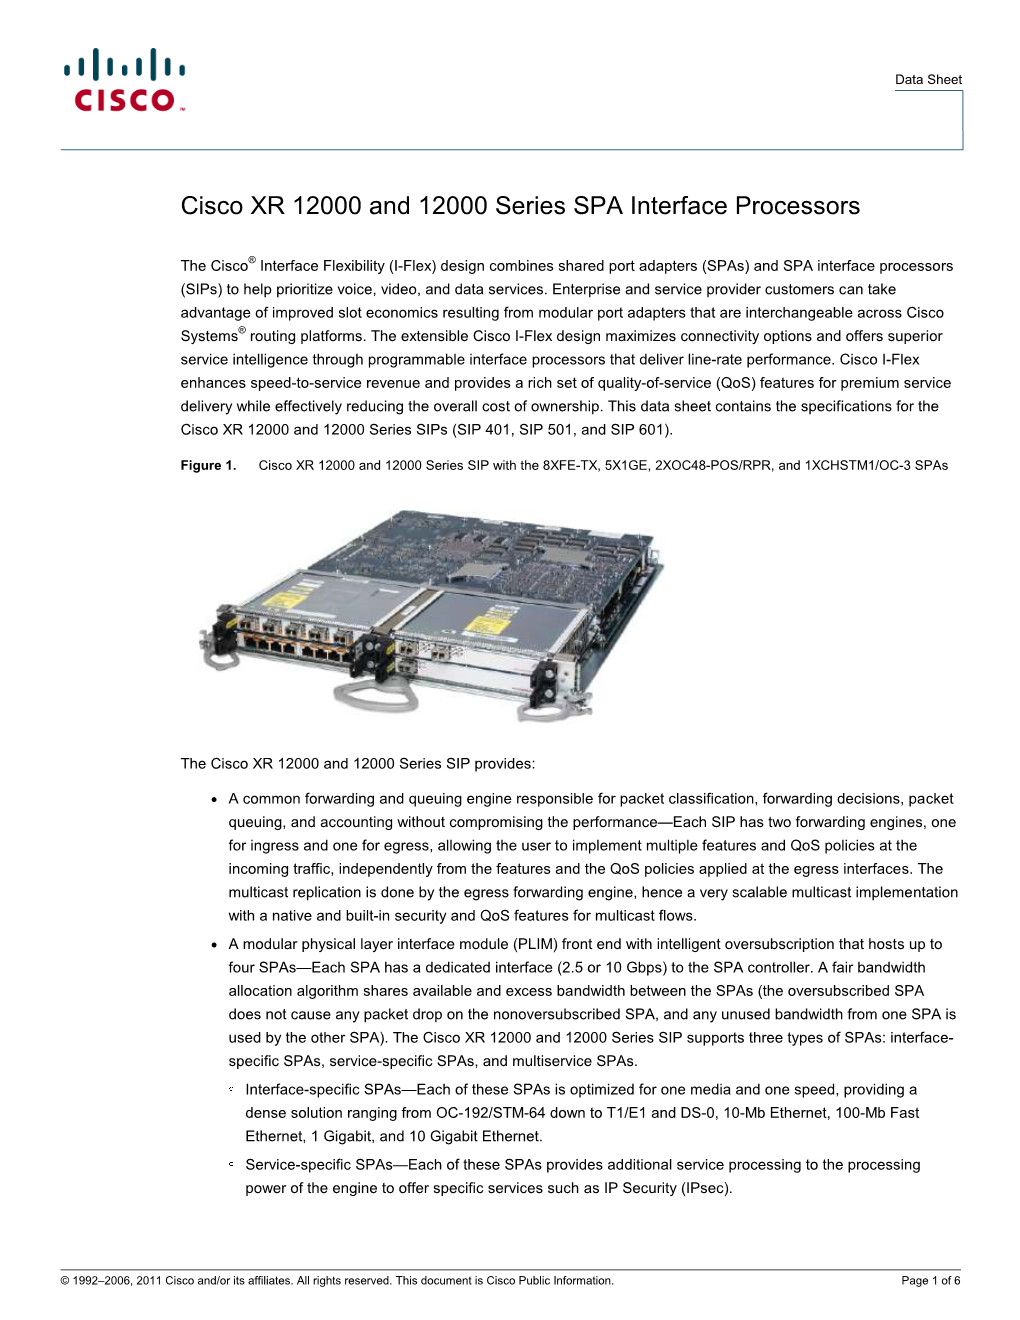 Cisco XR 12000 and 12000 Series SPA Interface Processors